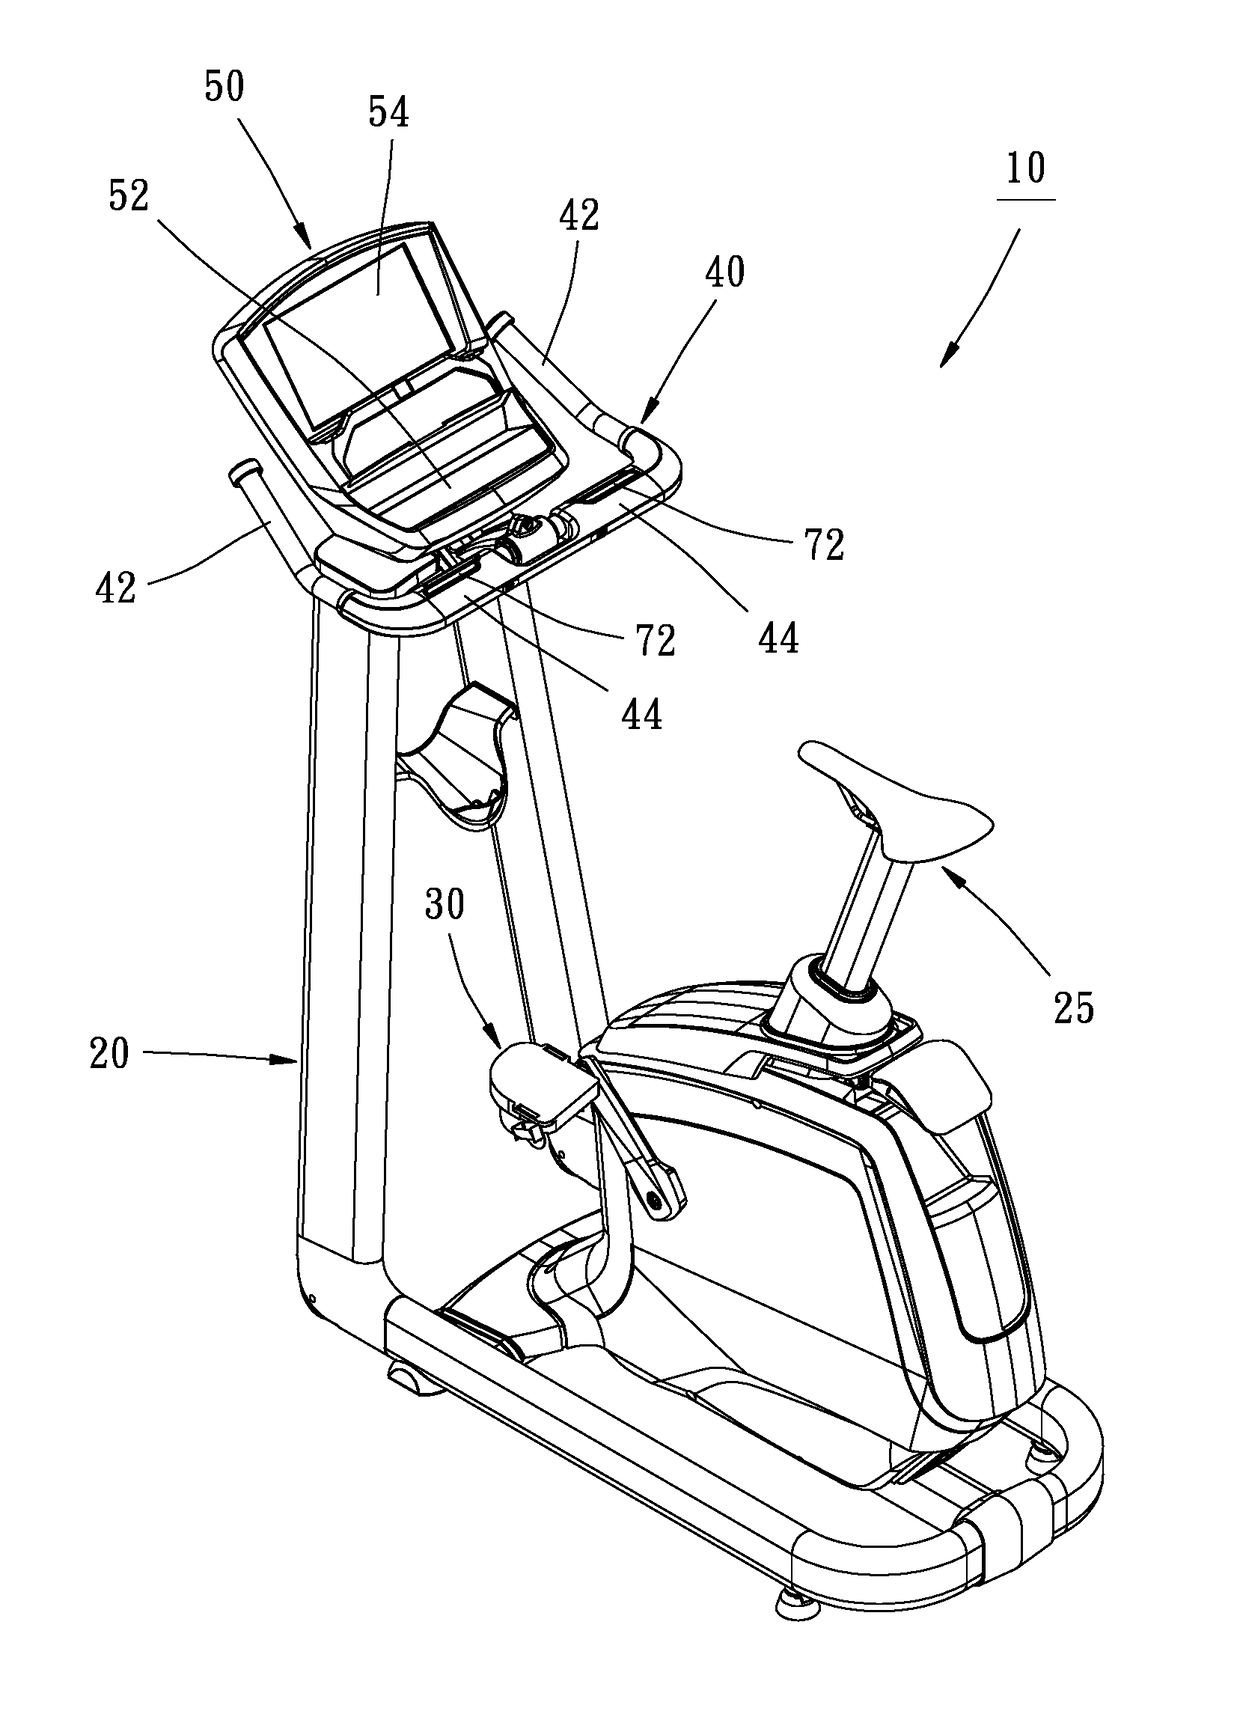 Exercise apparatuse with temperature variable handle assembly